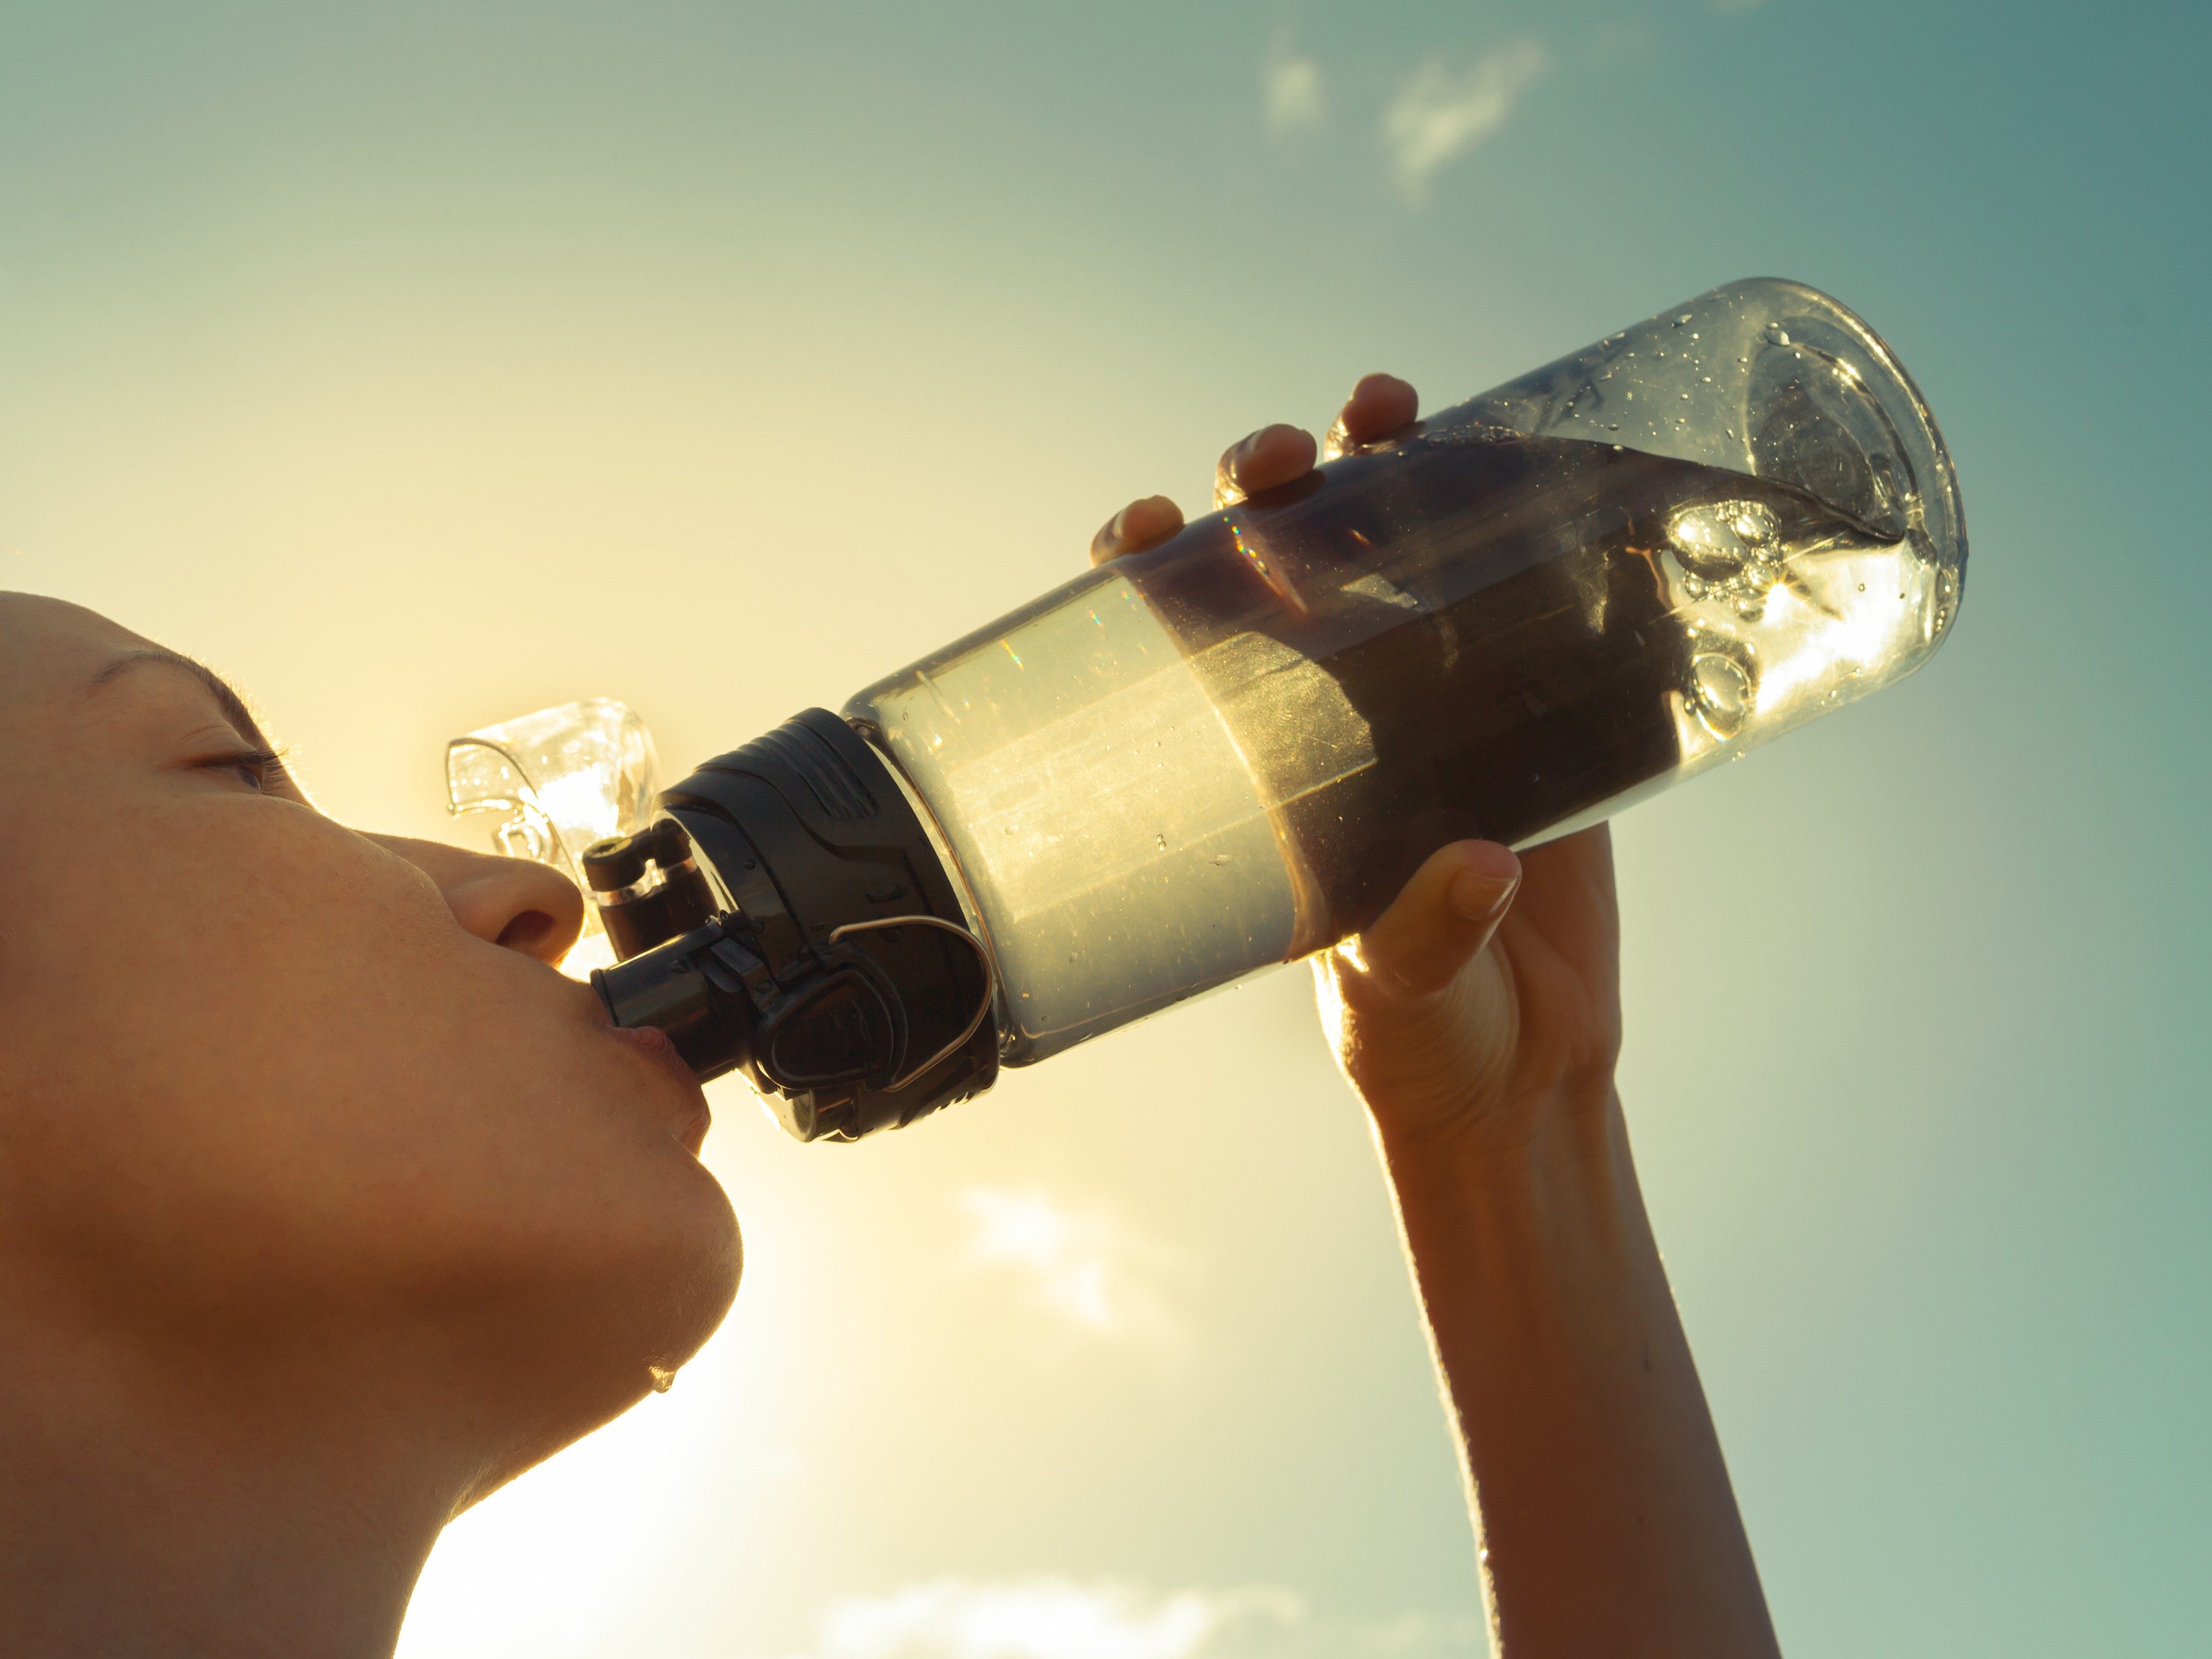 8. Stay well hydrated.